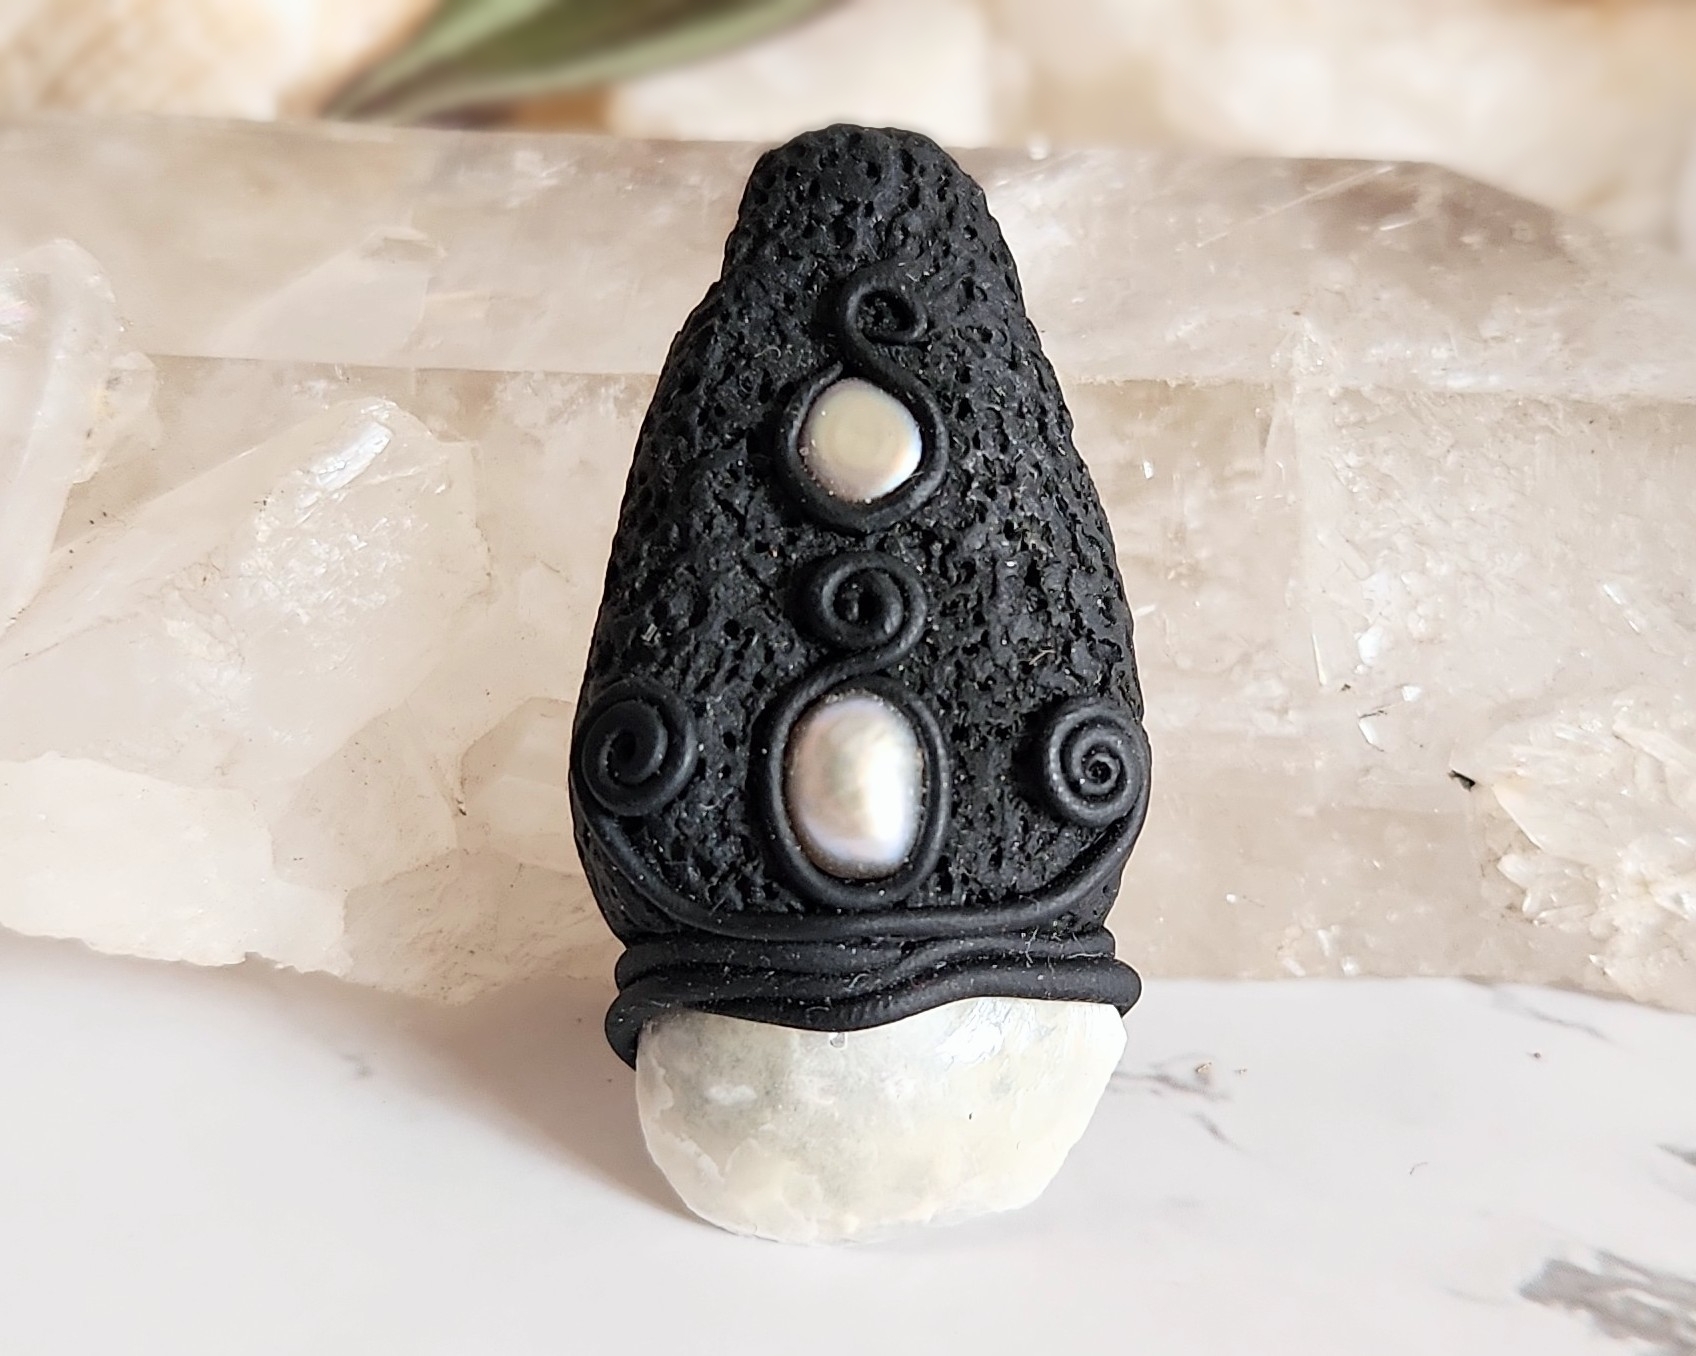 White Jingle Shell and Freshwater Pearl Black Polymer Clay Pendant